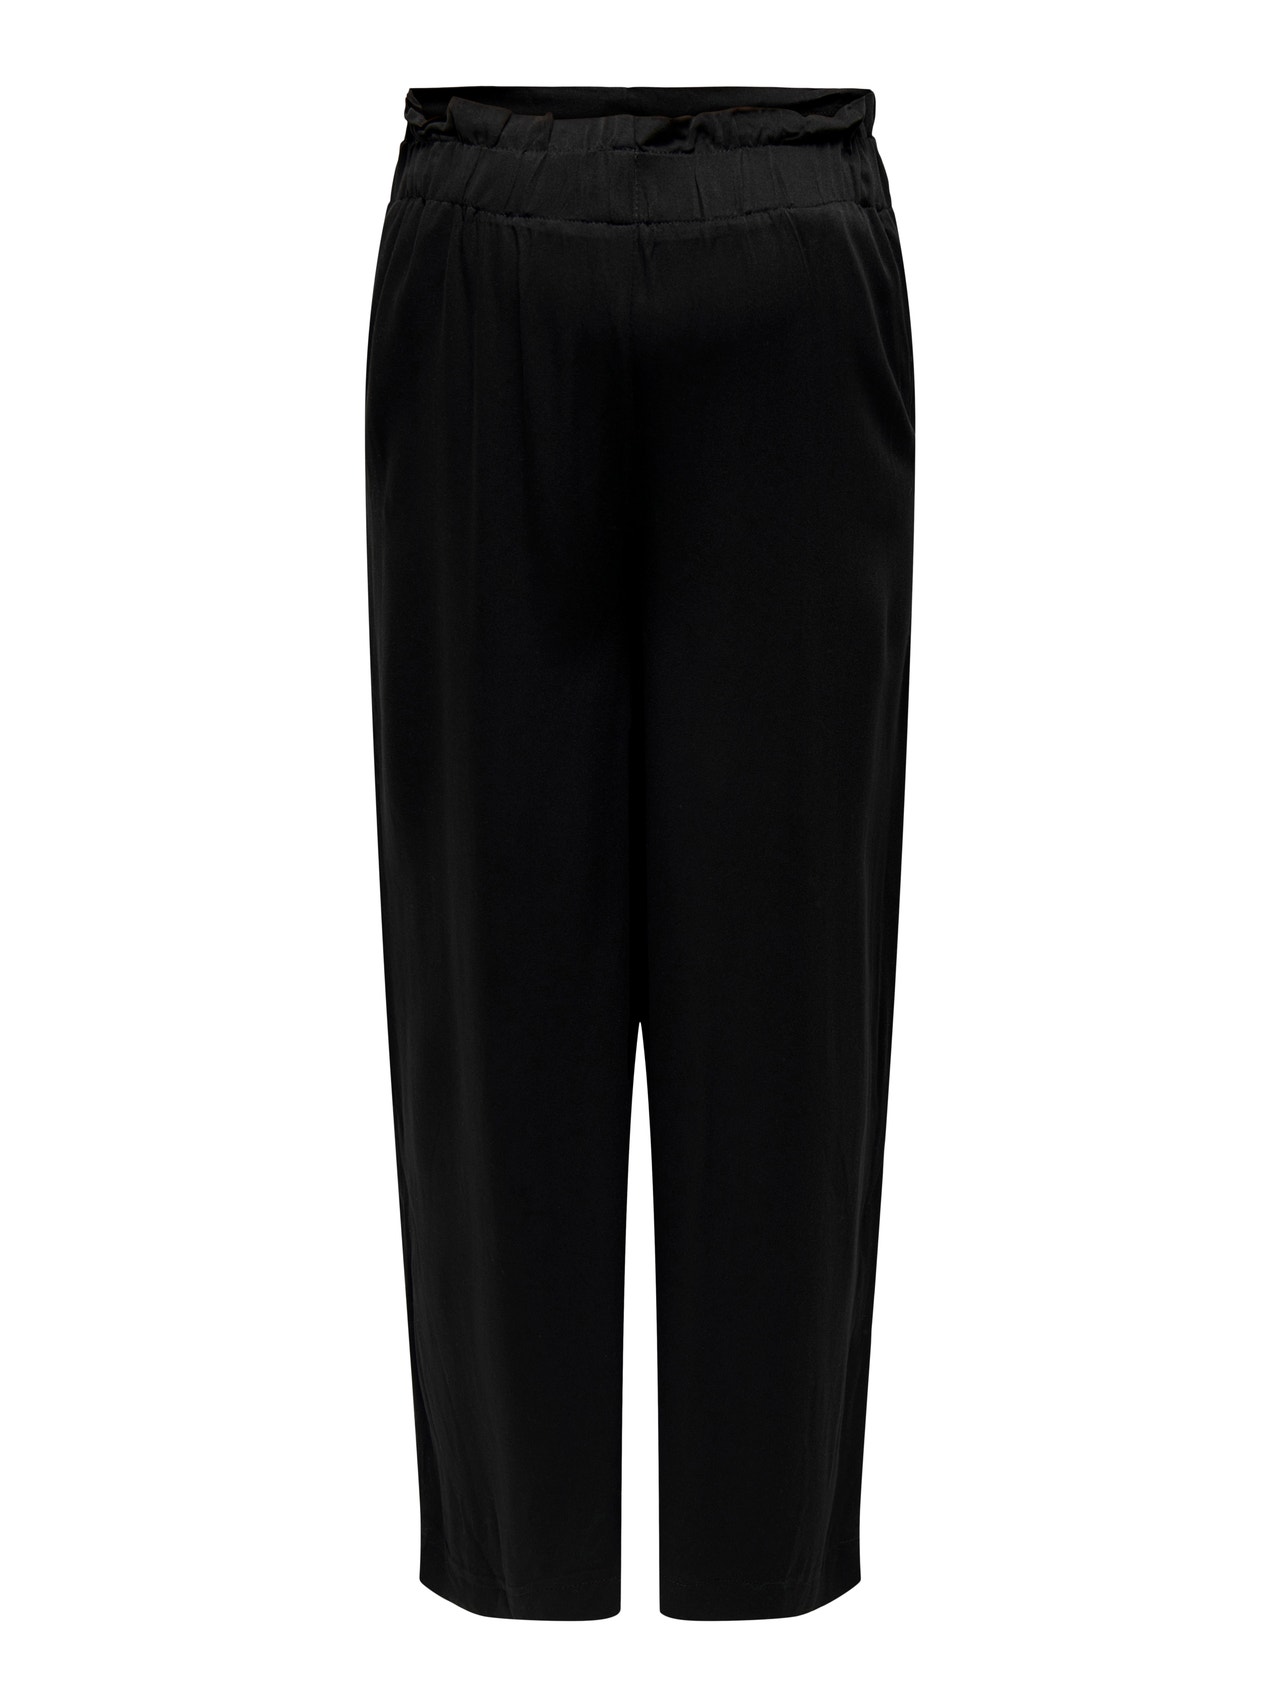 ONLY Loose Fit High waist Maternity Trousers -Black - 15267622